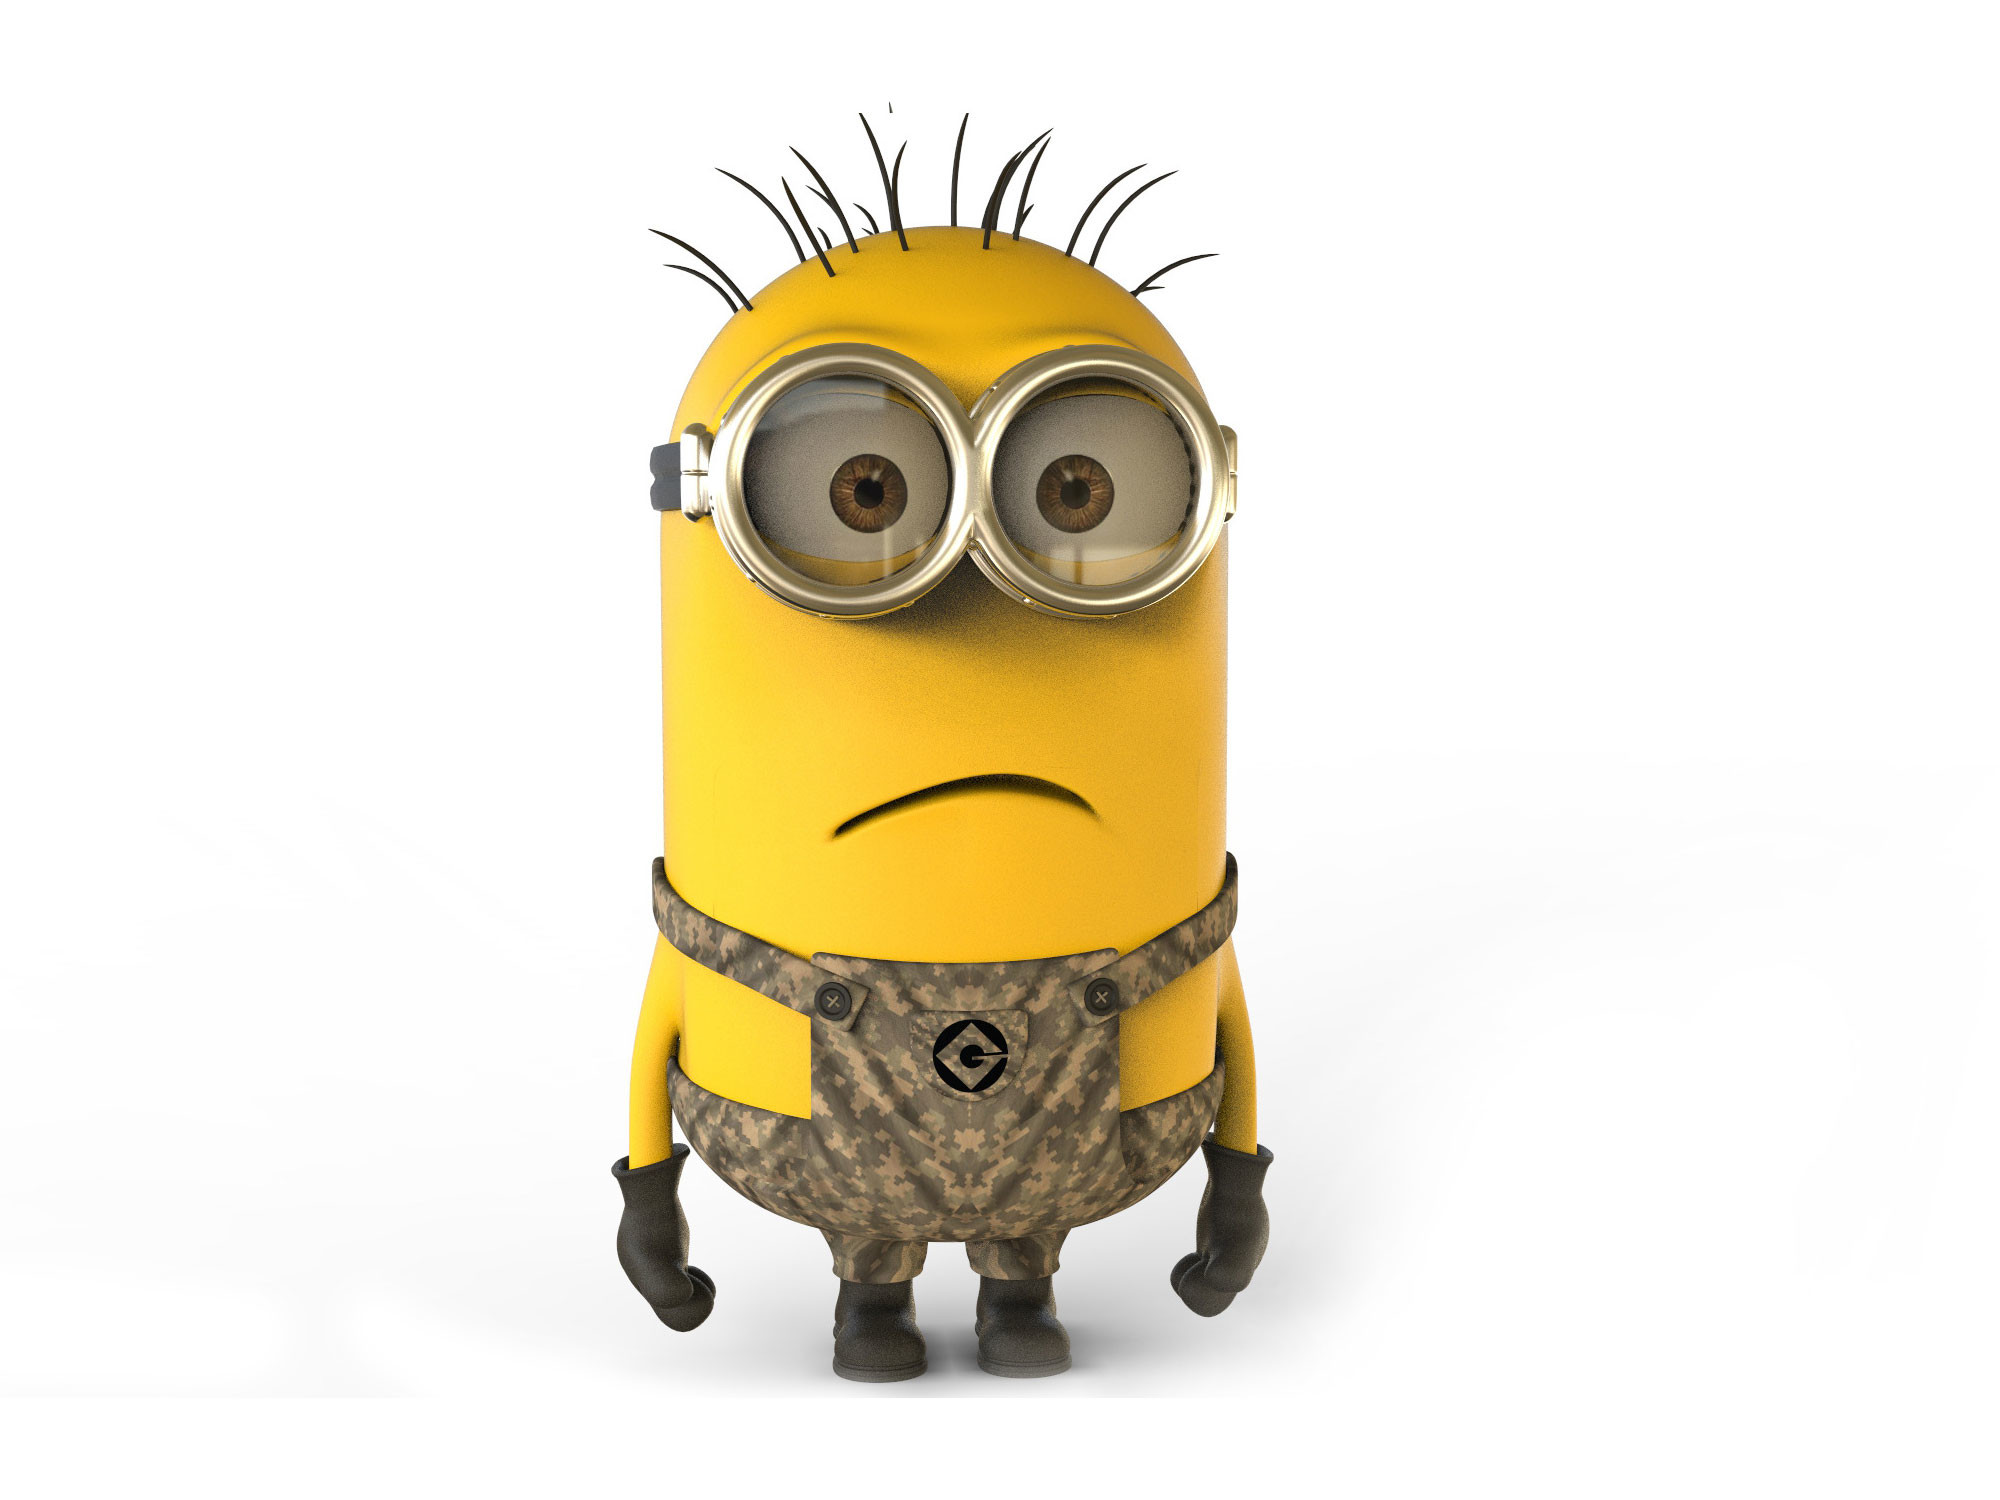 Despicable Me Minions Background (71+ pictures)